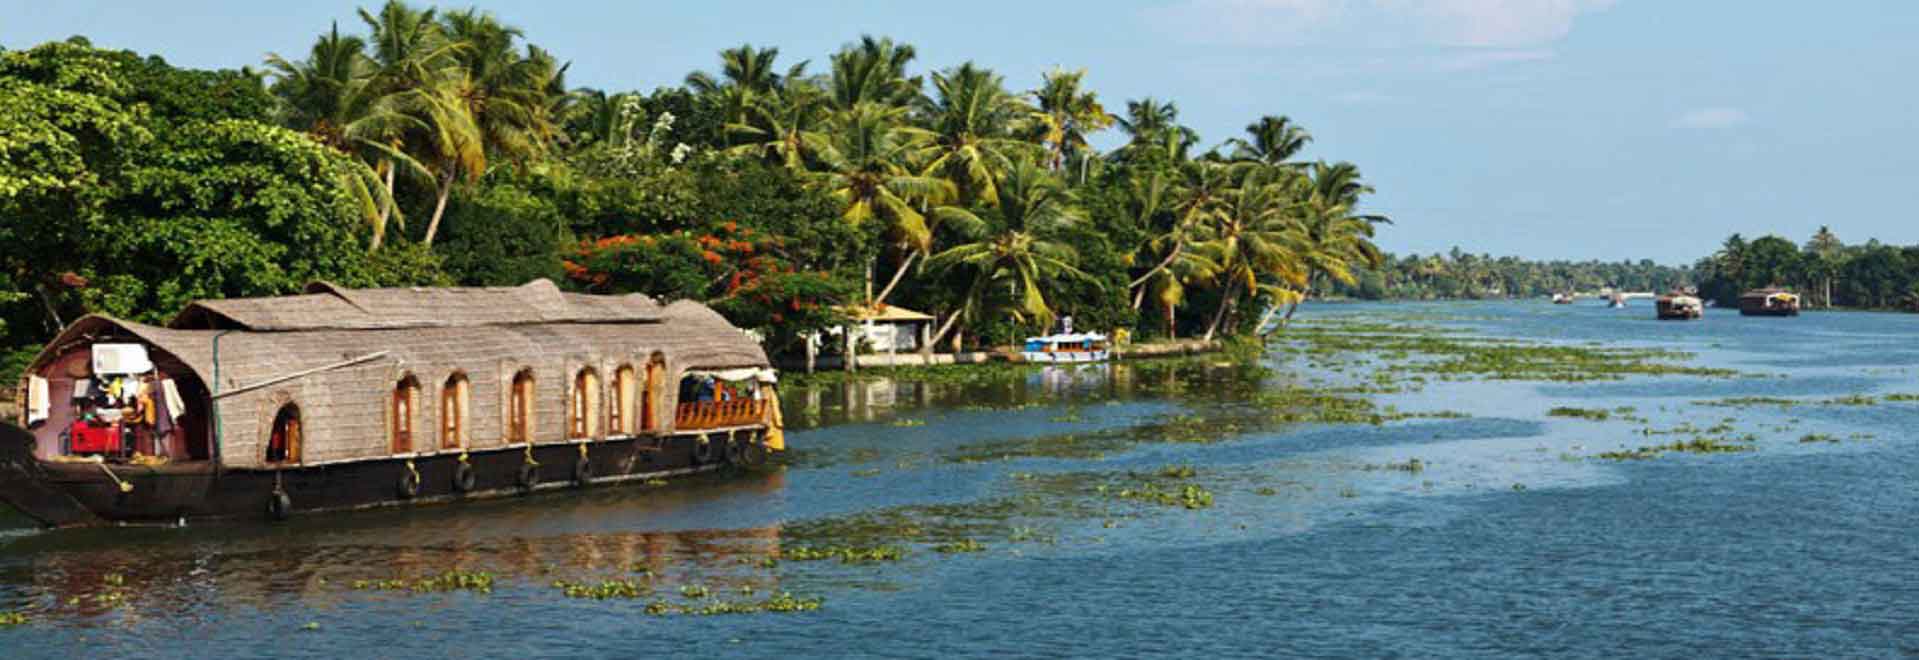 Kerala Tour packages